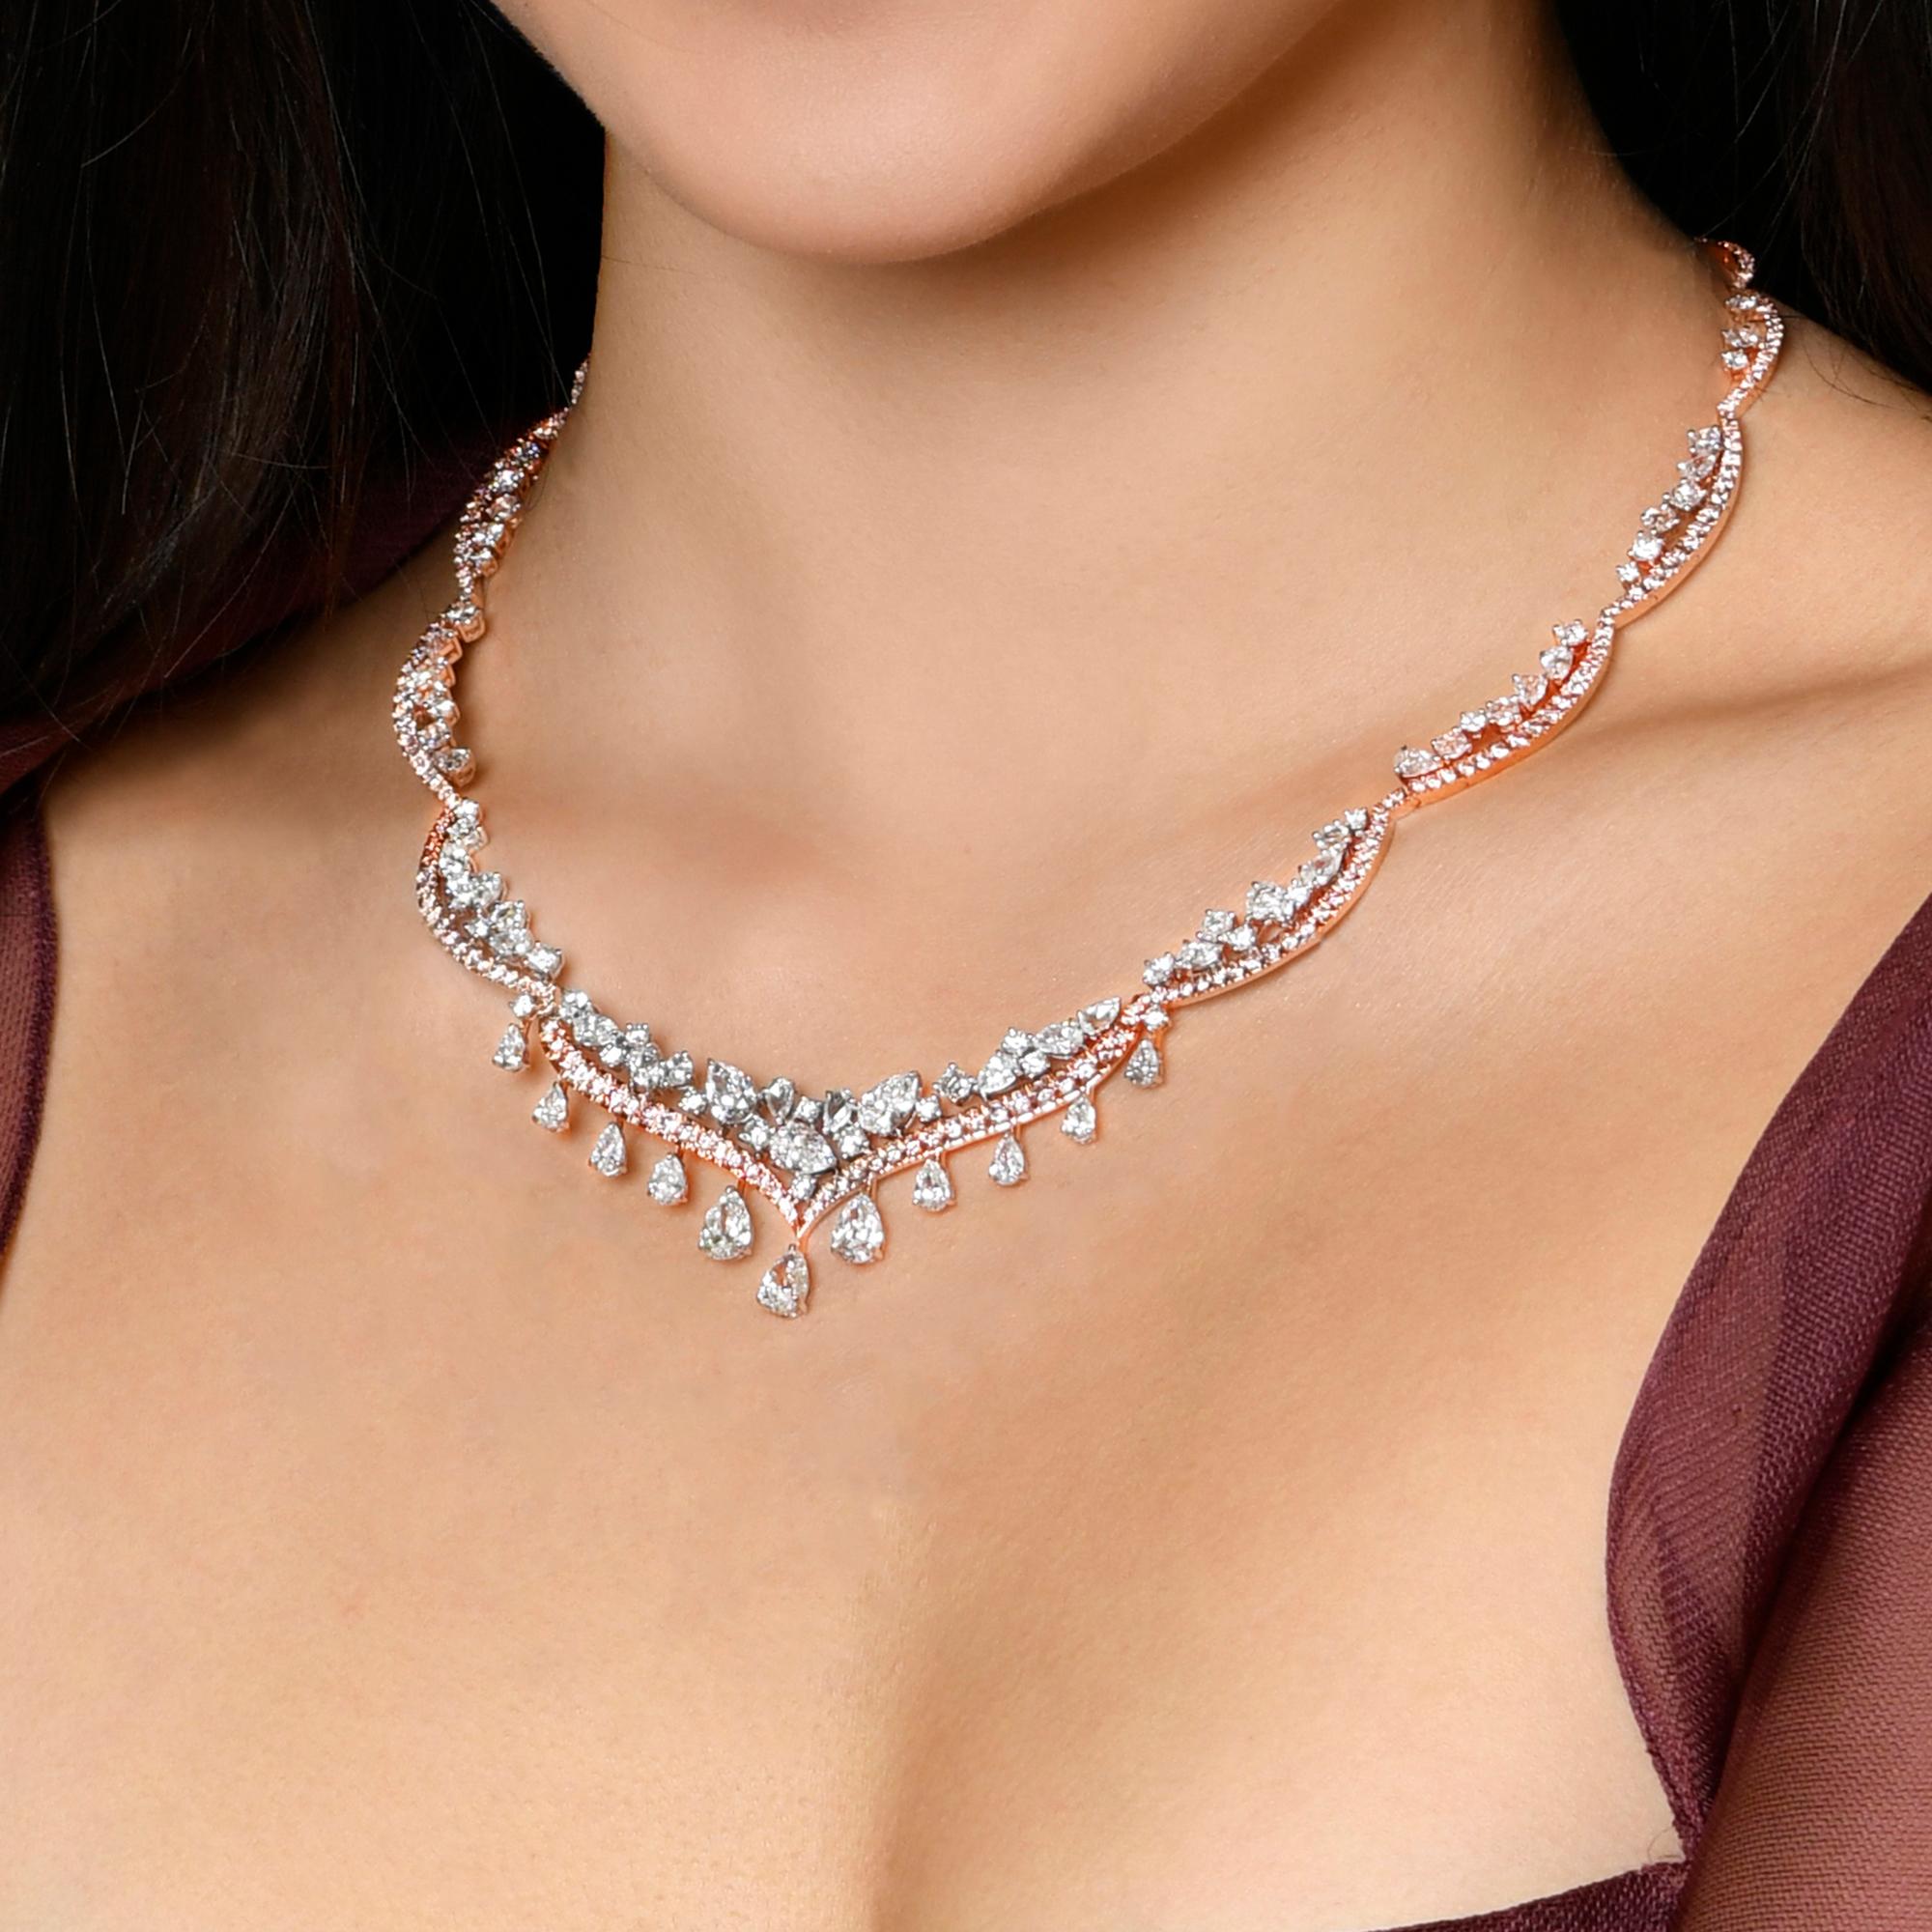 Inspired by the glamorous Indian Haveli (royal abode), this diamond necklace is studded with brilliant round, Argyle pink diamonds, pear shape full cut, rose cut round and rose cut pear diamonds, weighing a total of 16.82 carats. This necklace is